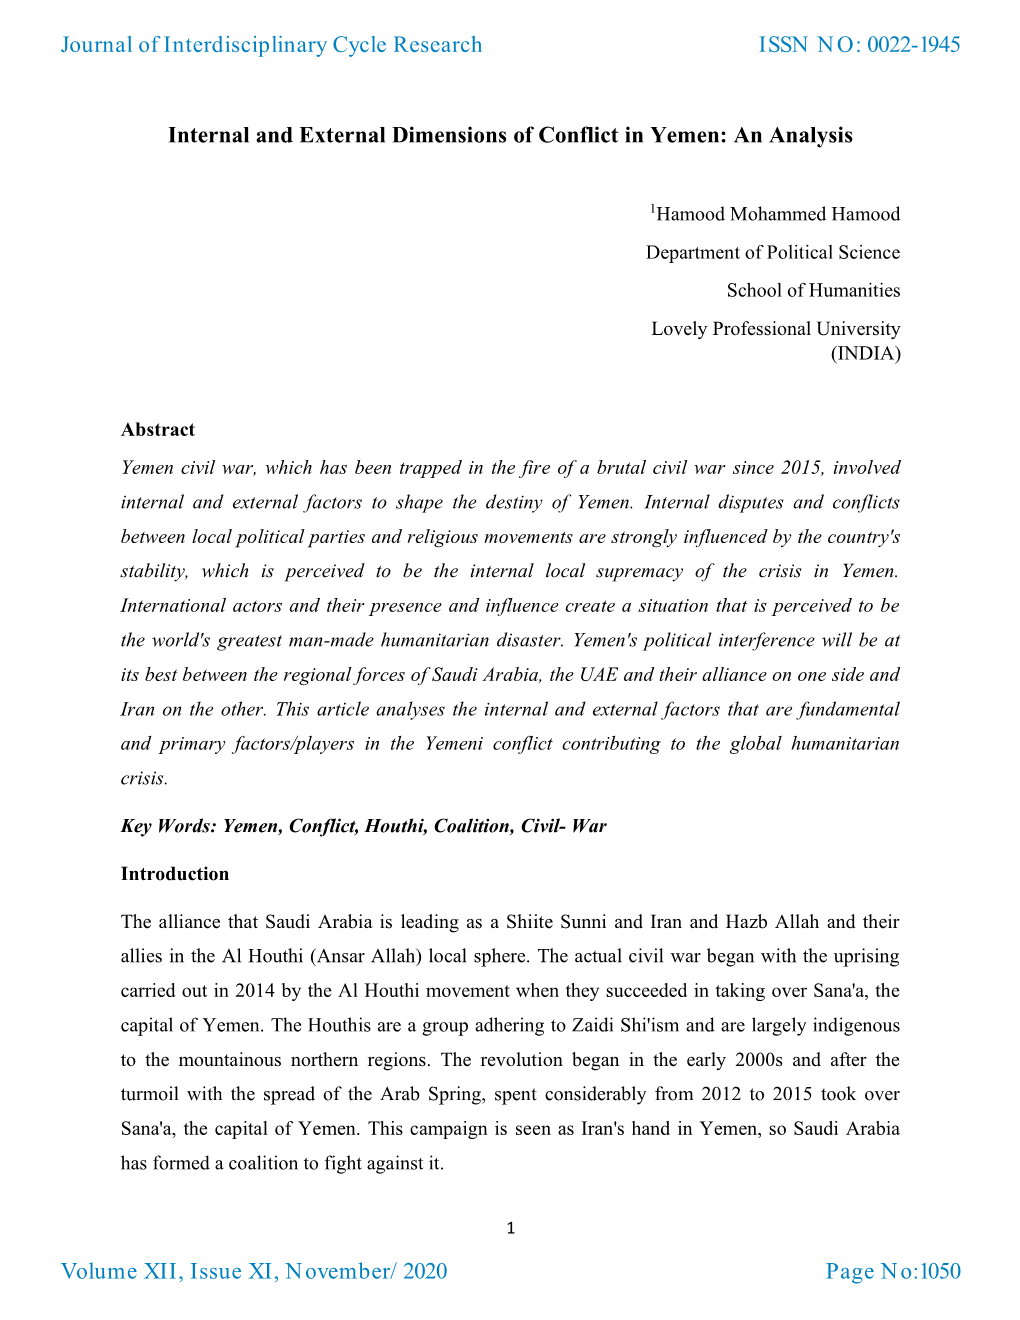 Internal and External Dimensions of Conflict in Yemen: an Analysis